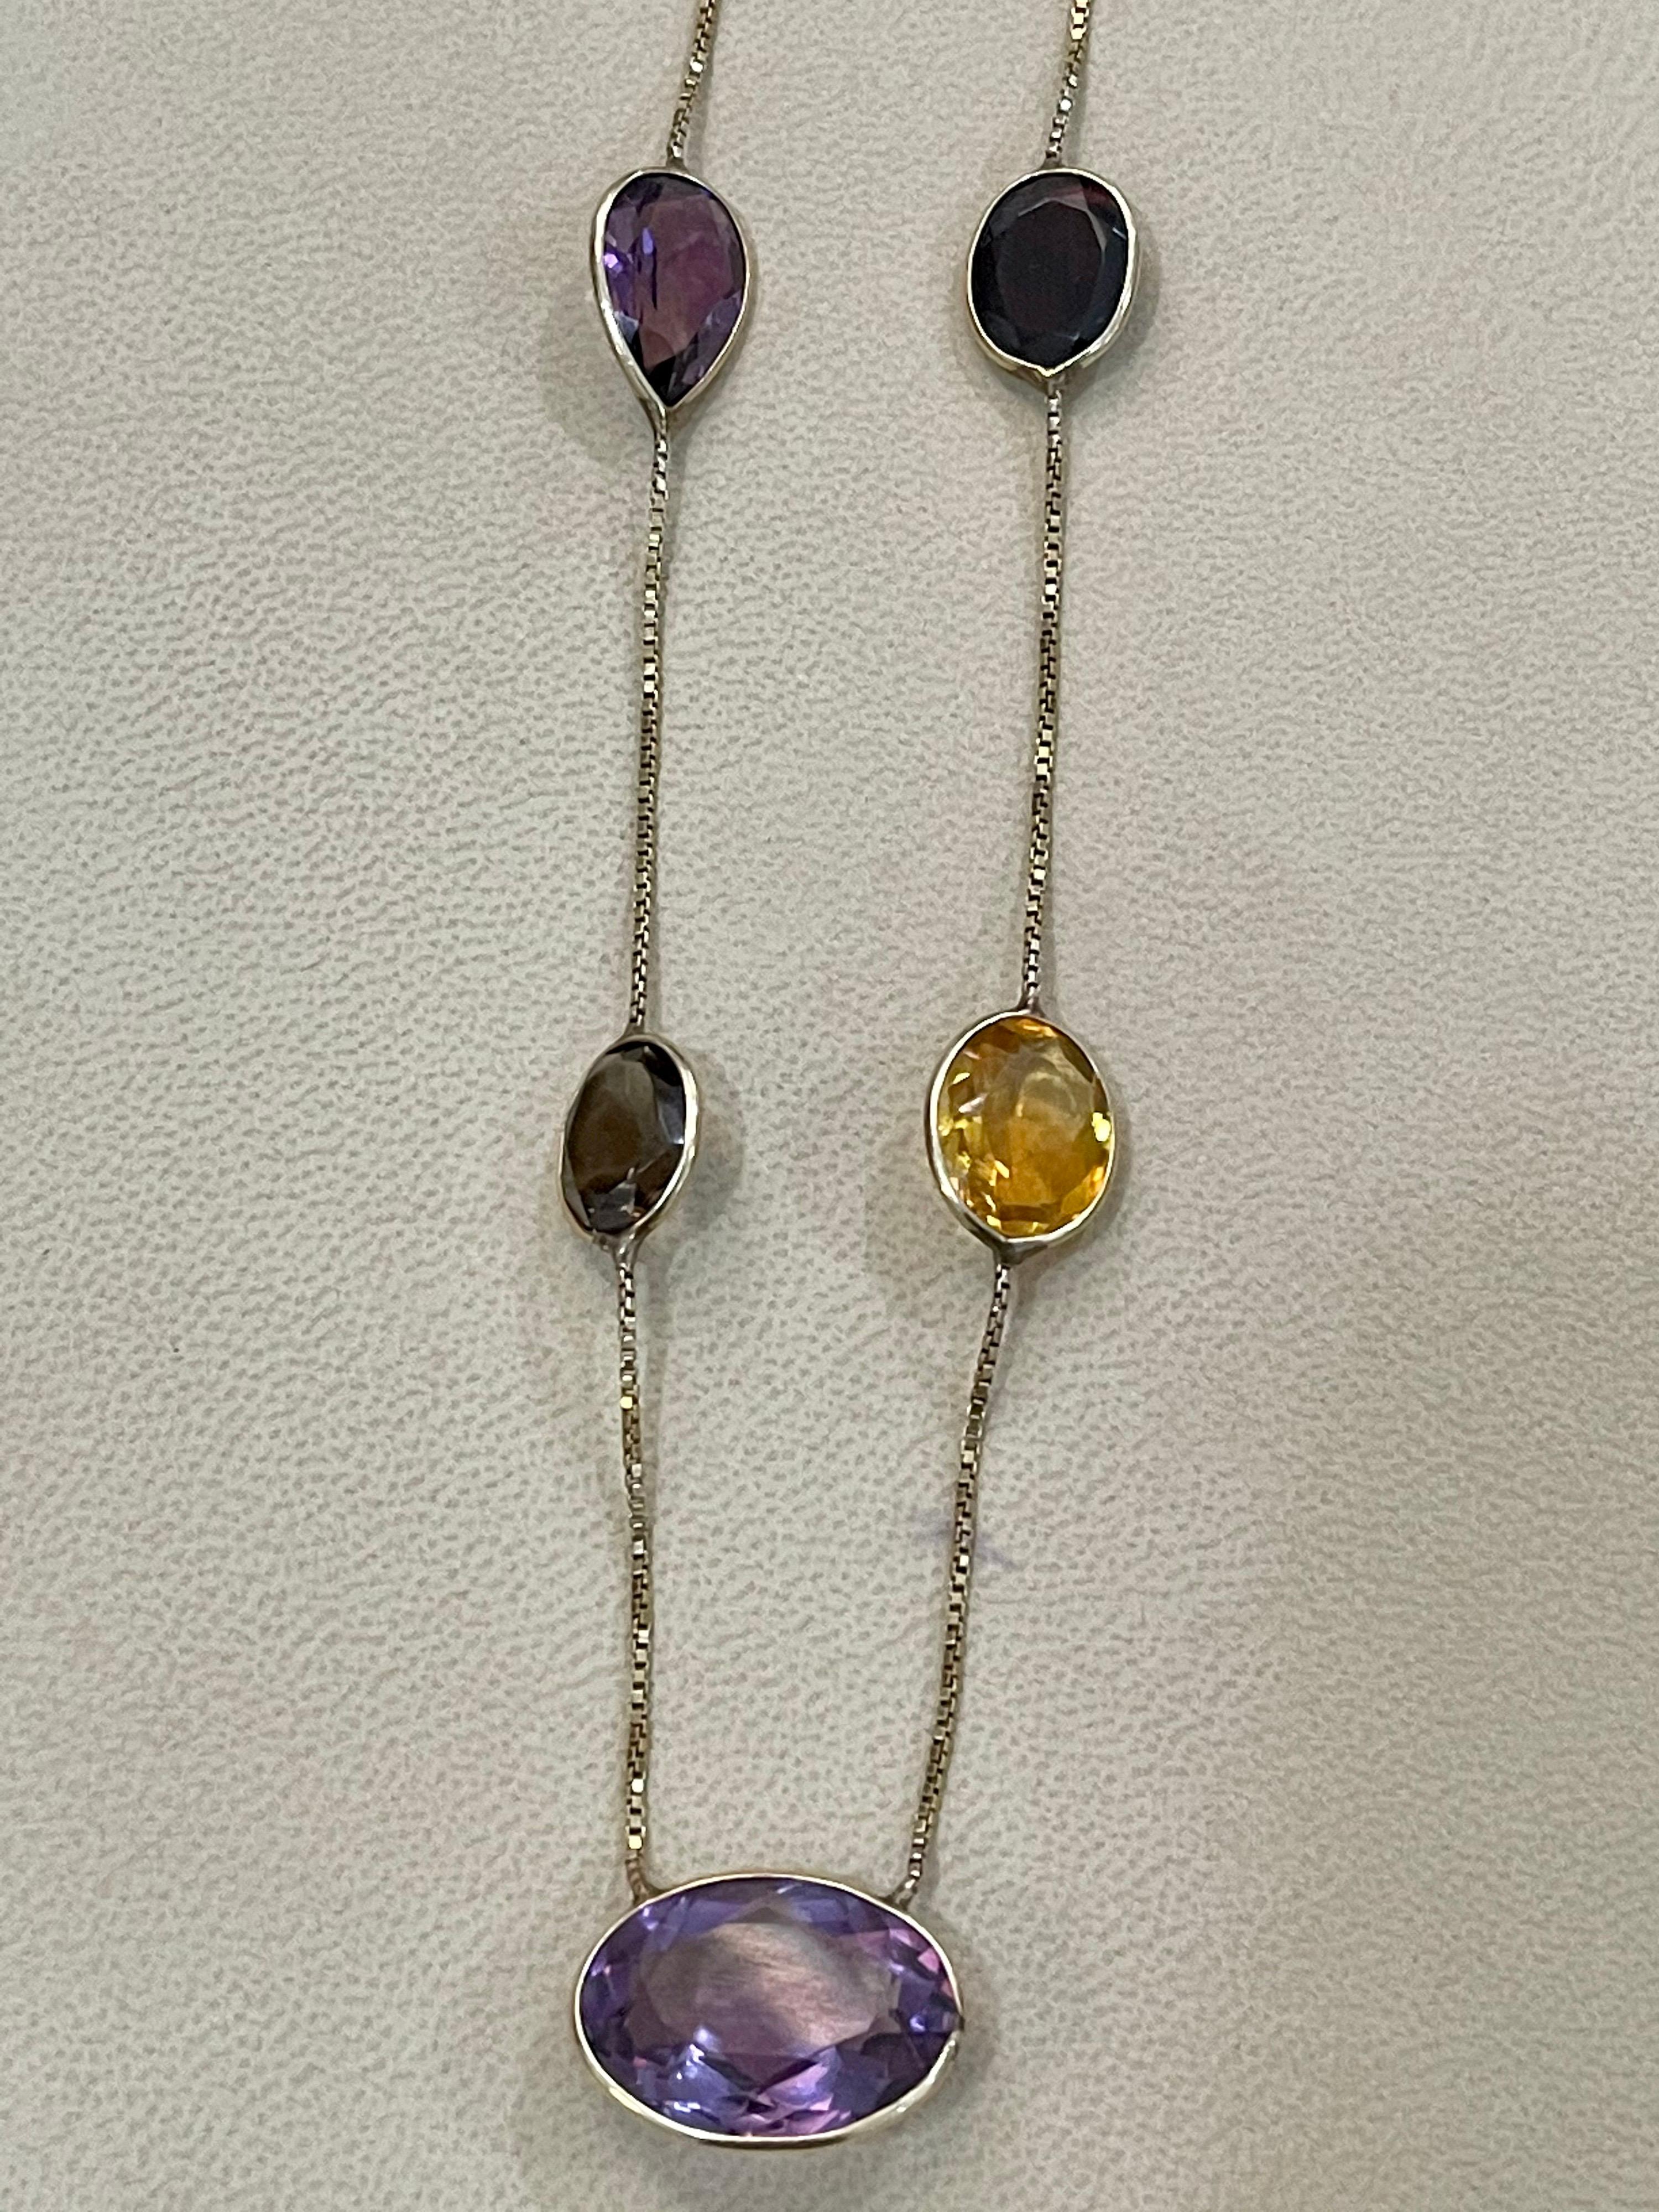 20 Carat Amethyst, Citrine and Smoky Quartz 5-Piece Chain Necklace 14 Karat Gold In Excellent Condition For Sale In New York, NY